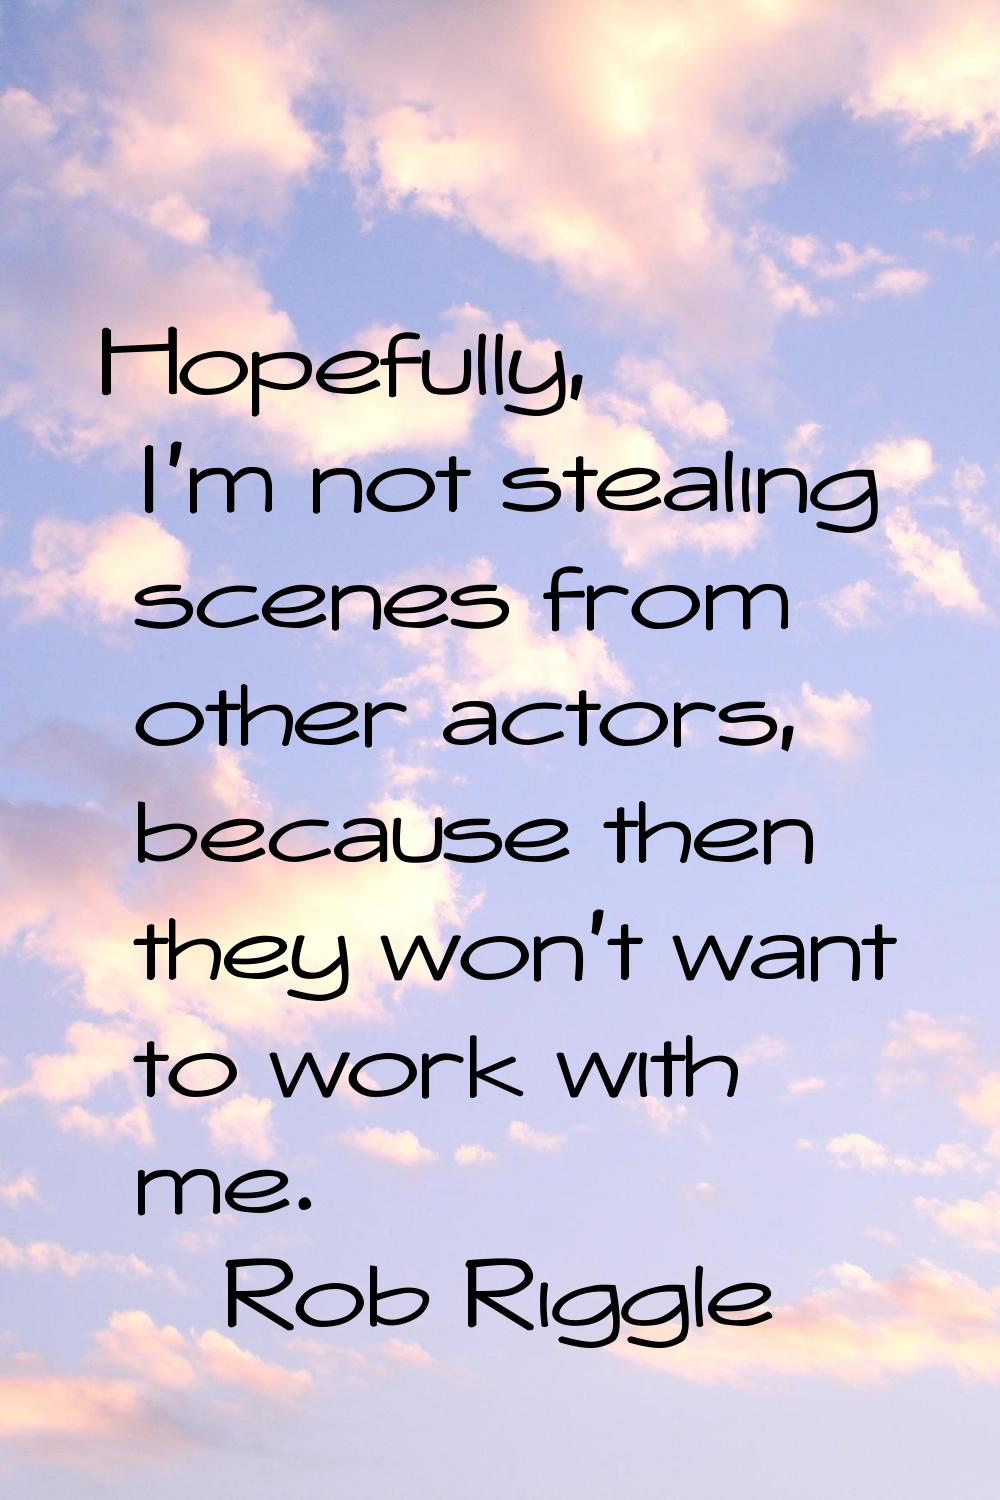 Hopefully, I'm not stealing scenes from other actors, because then they won't want to work with me.